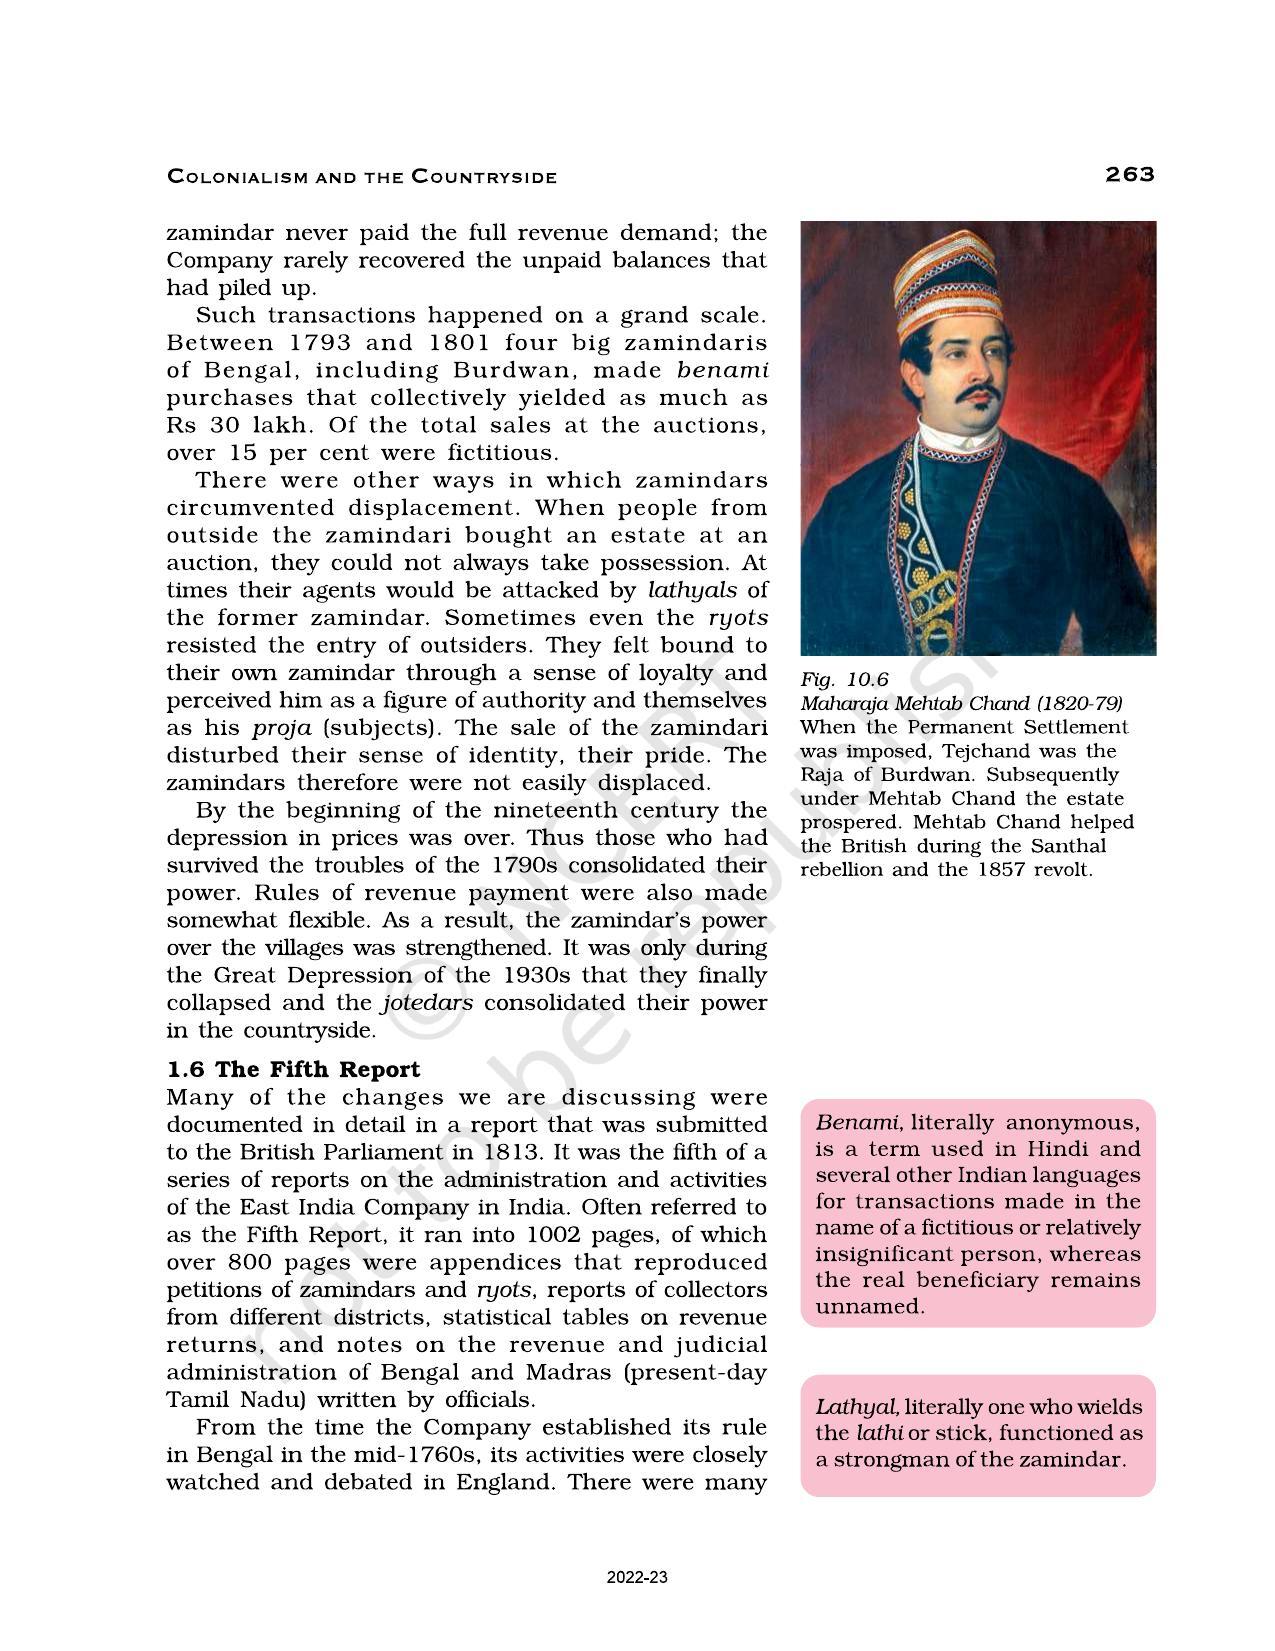 NCERT Book for Class 12 History (Part-II) Chapter 10 Colonialism and the Countryside - Page 7